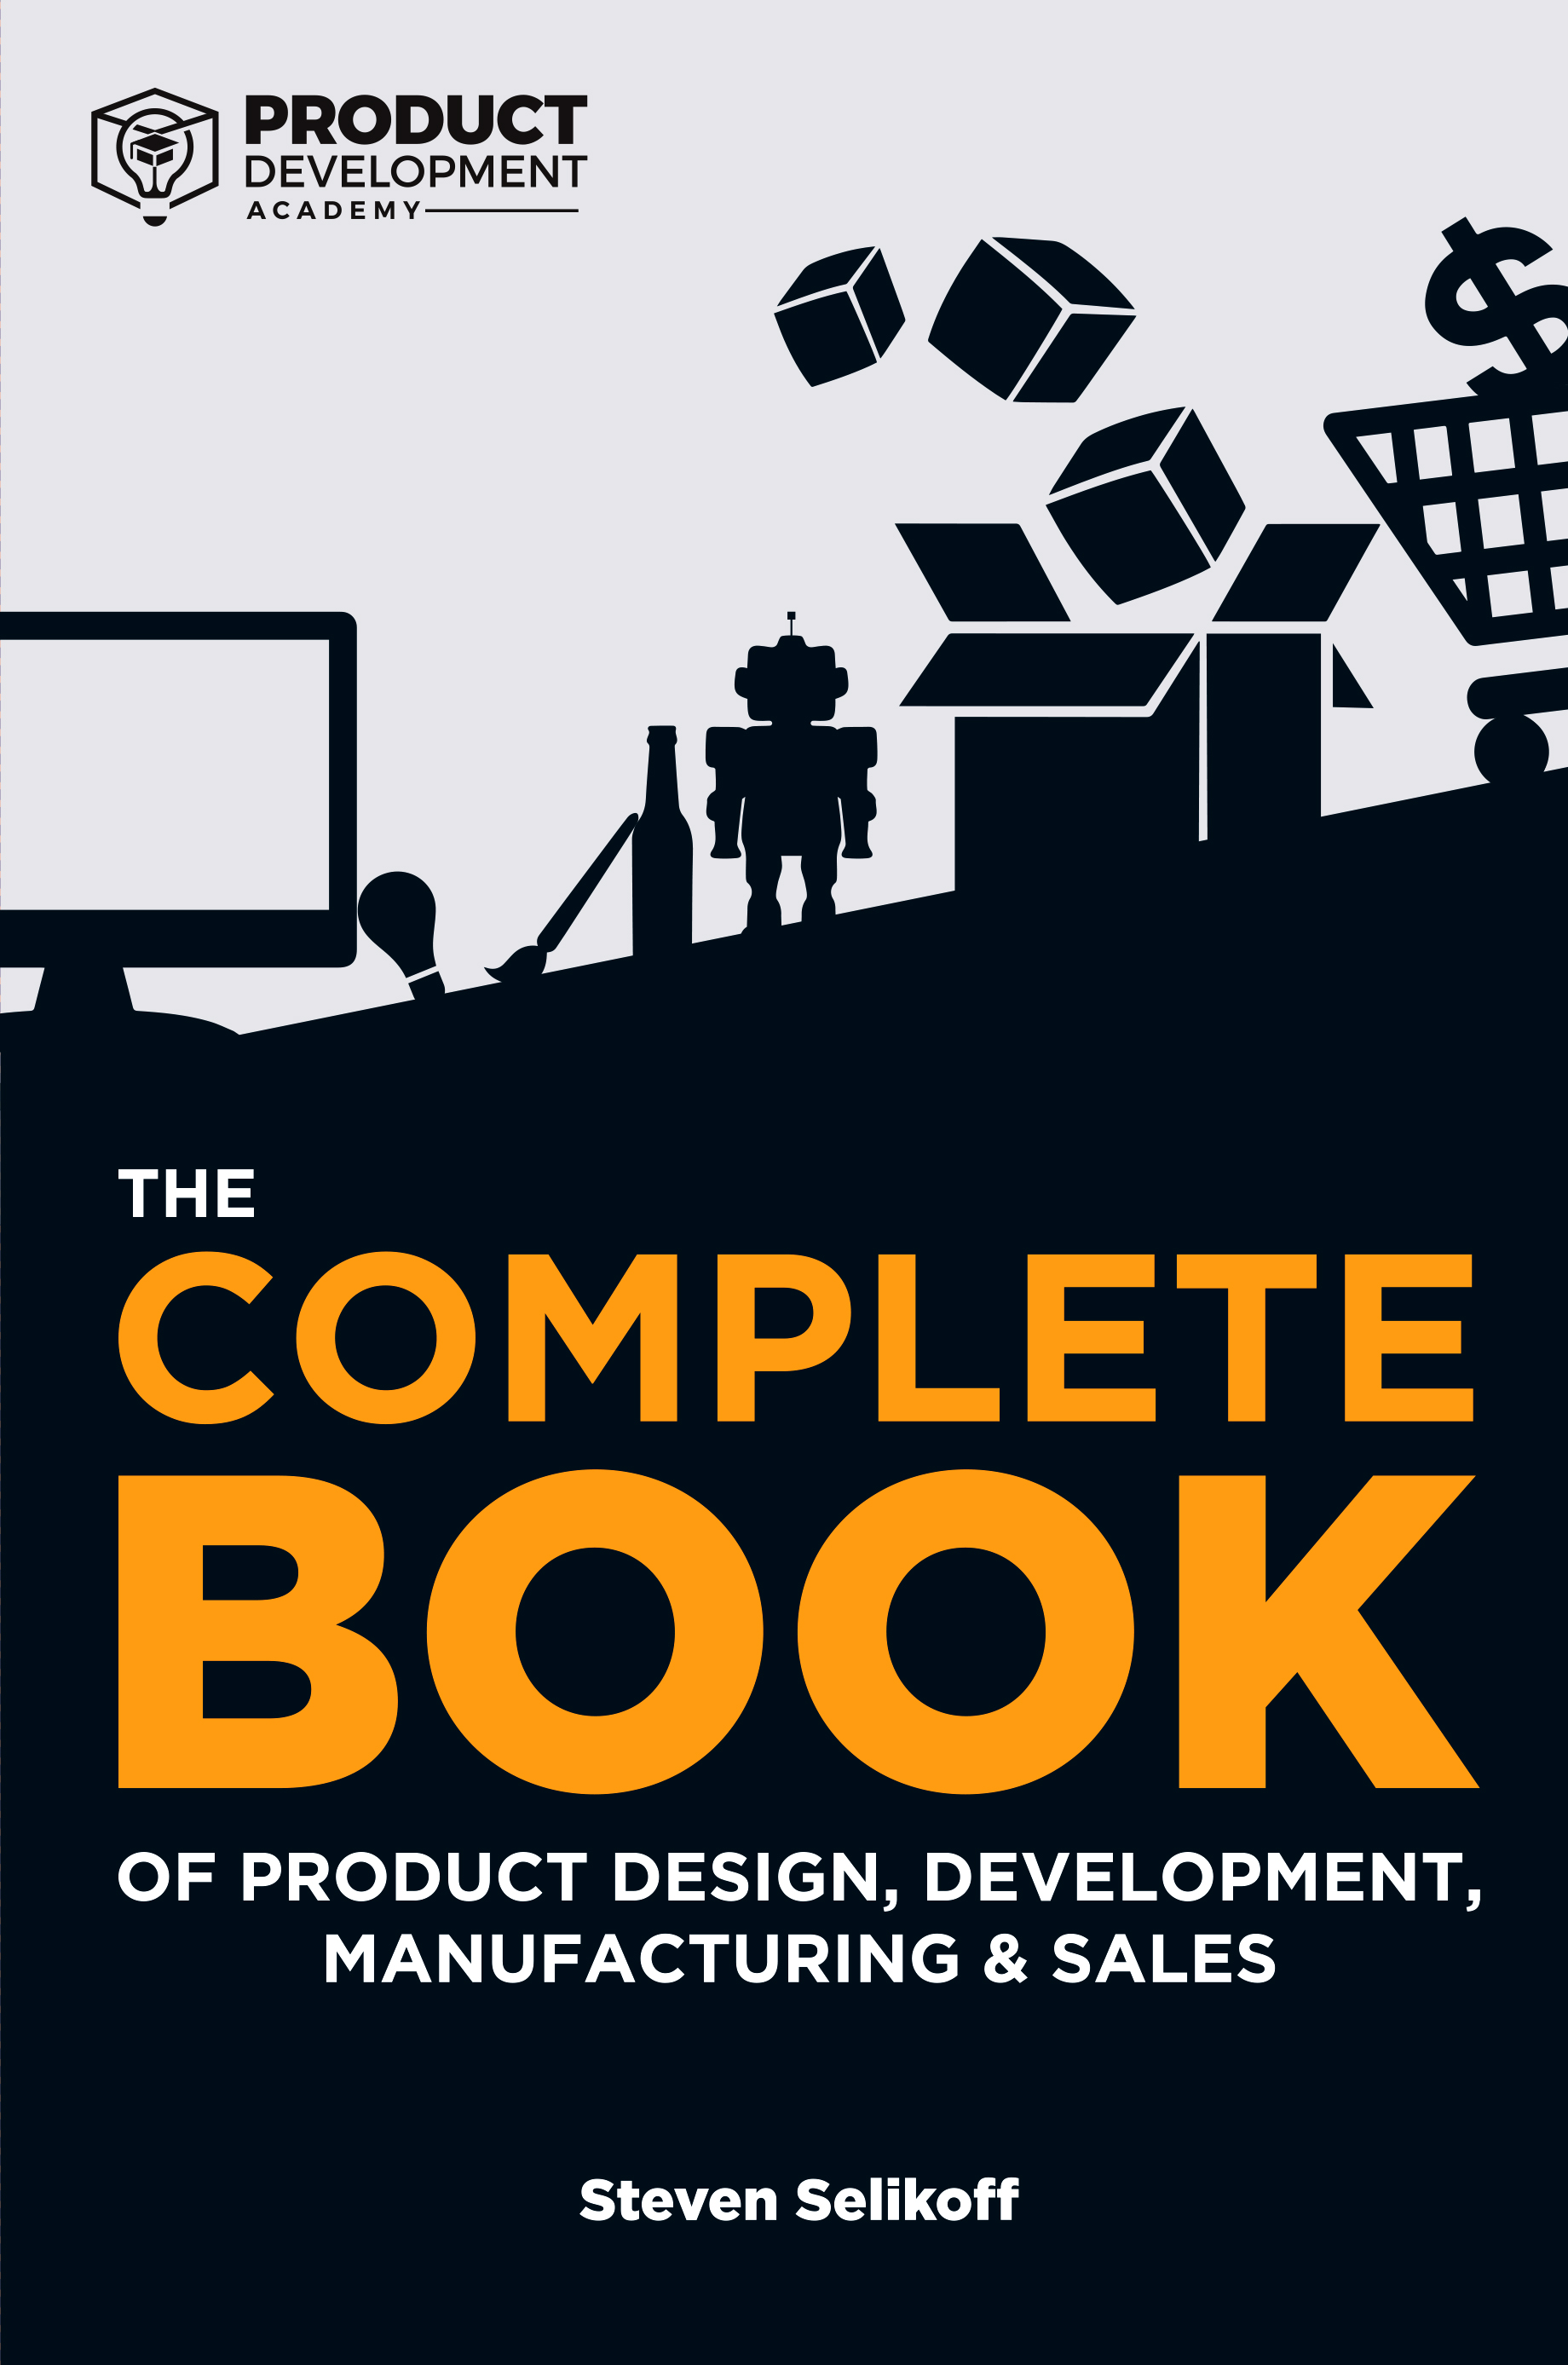 The COMPLETE BOOK of Product Design, Development, Manufacturing, and Sales can teach anyone how to develop new innovative products.